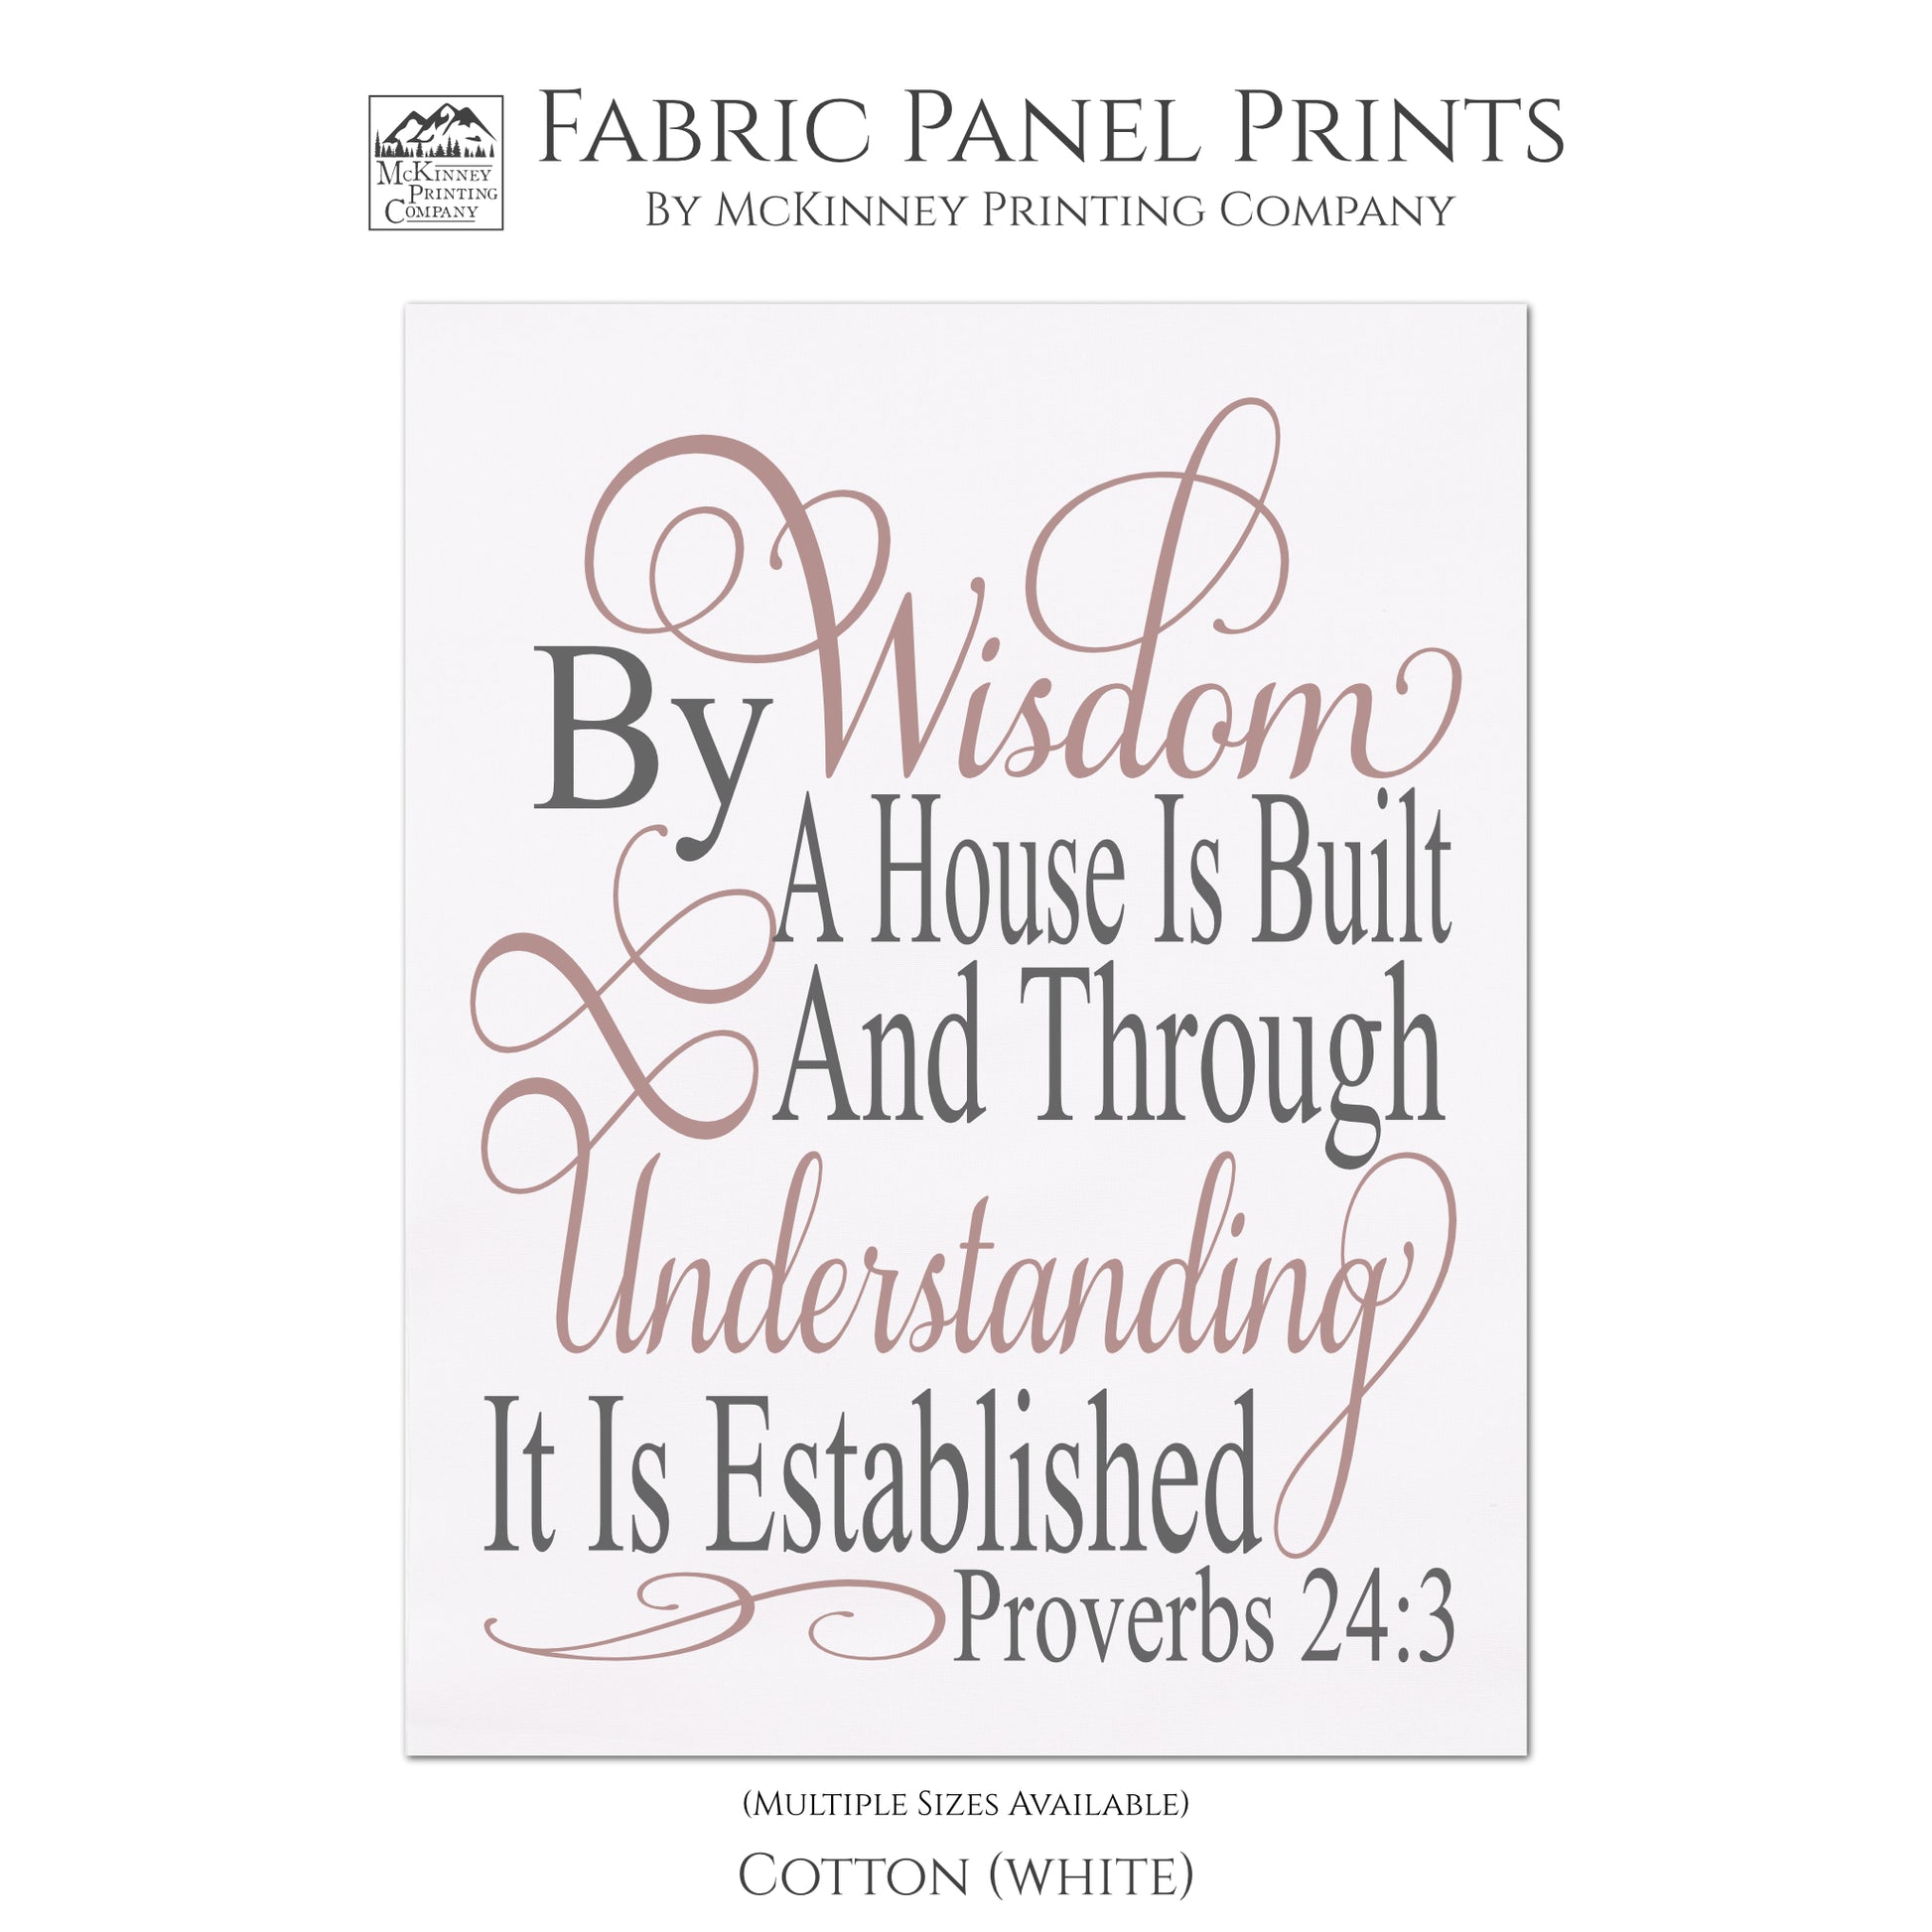 By wisdom a house is built and through understanding it is established. - Proverbs 24 3, Fabric Panel Print, Scripture Fabric, Religious, Bible Verse Wall Art - Cotton, White